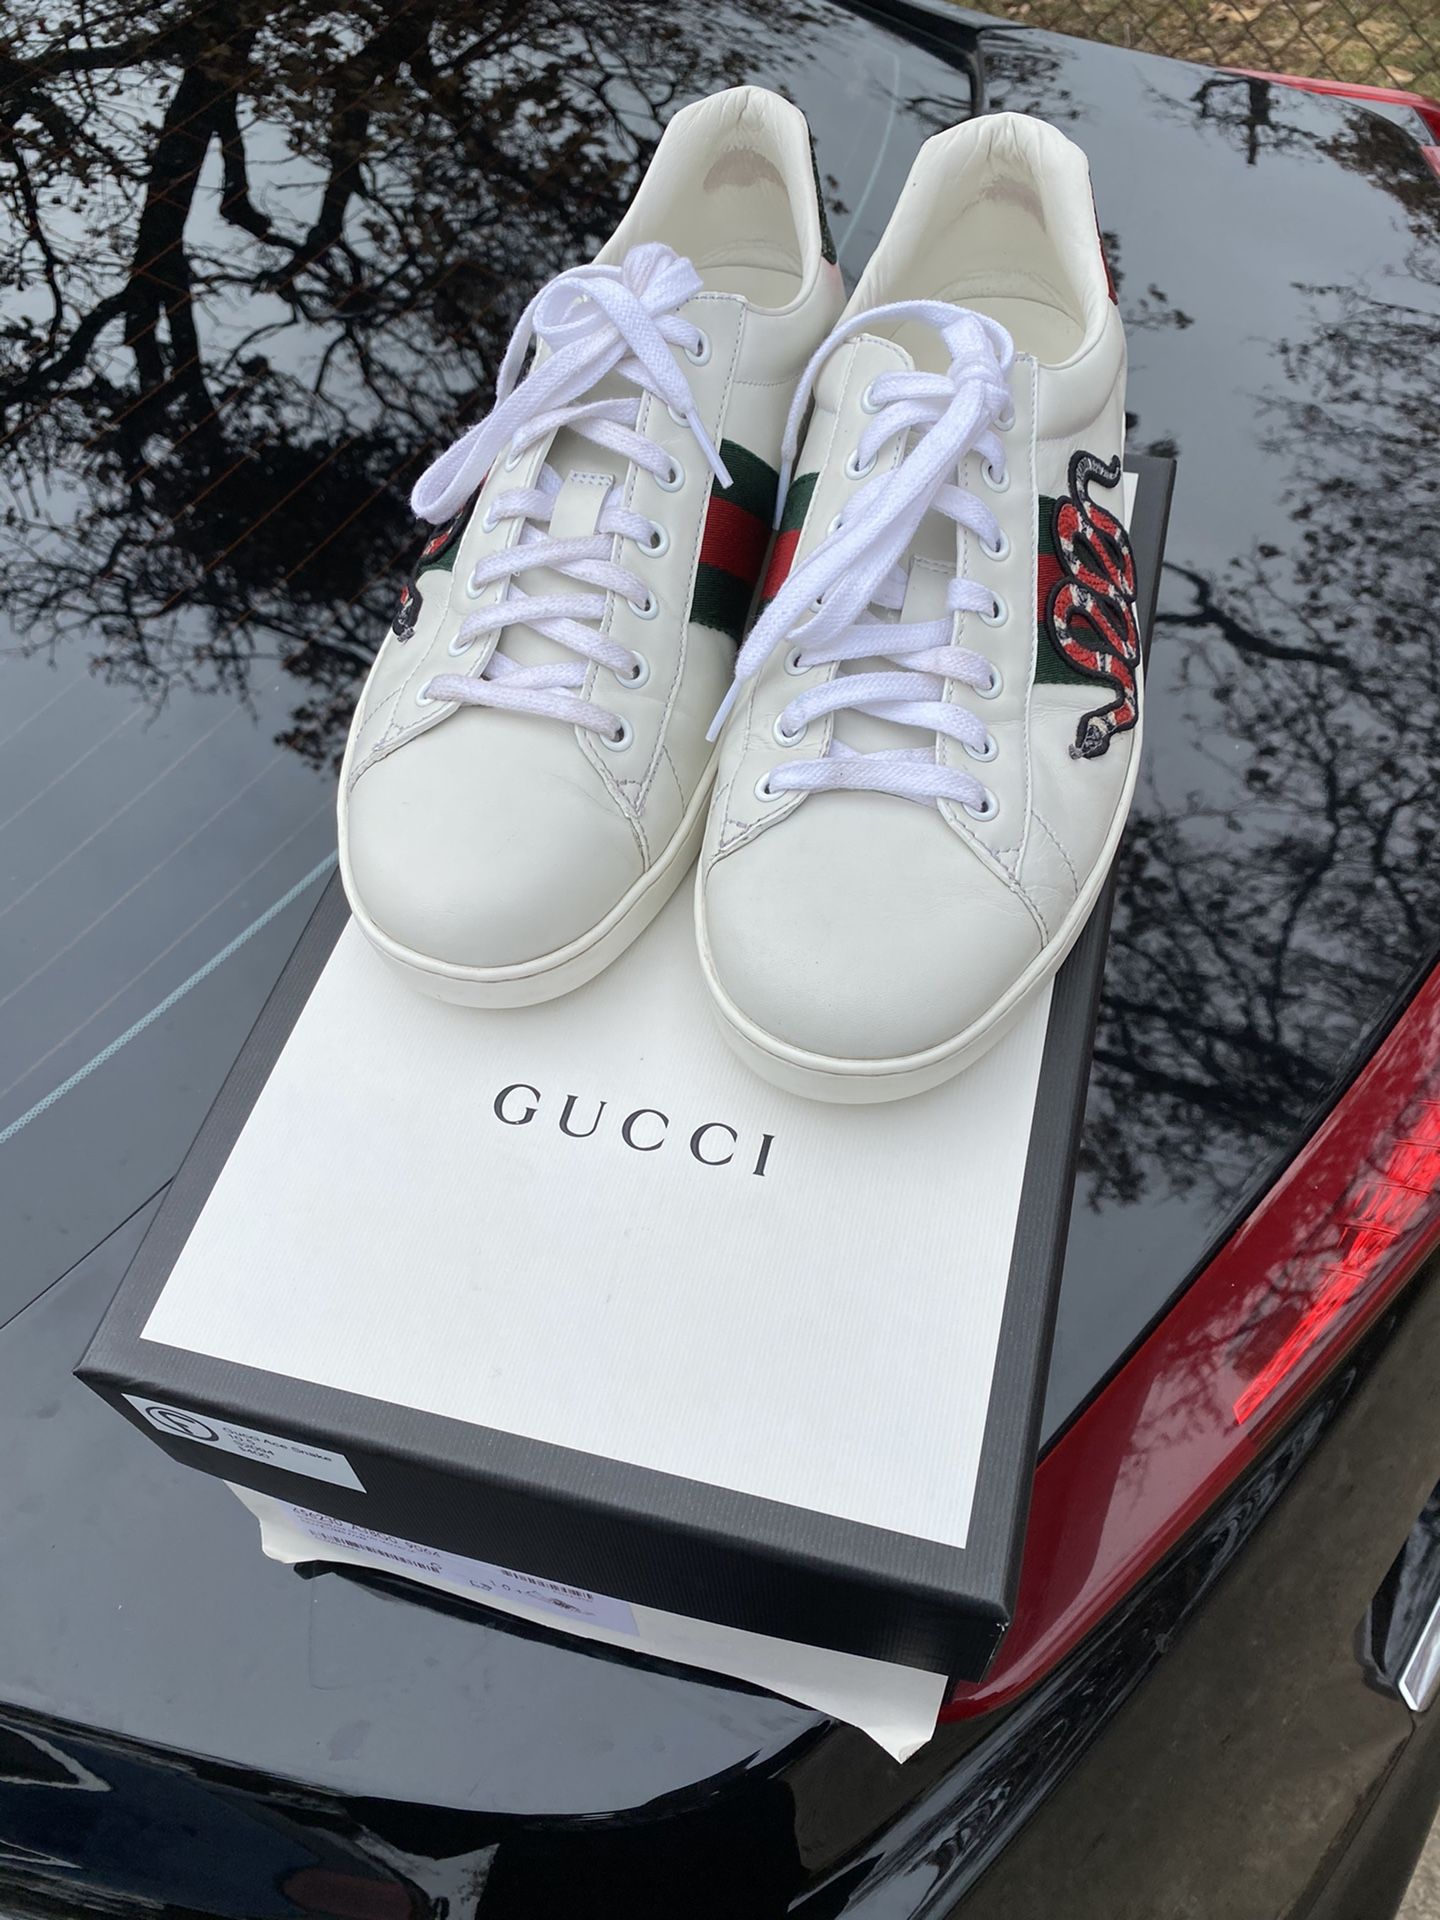 Gucci Ace Snake Sneakers